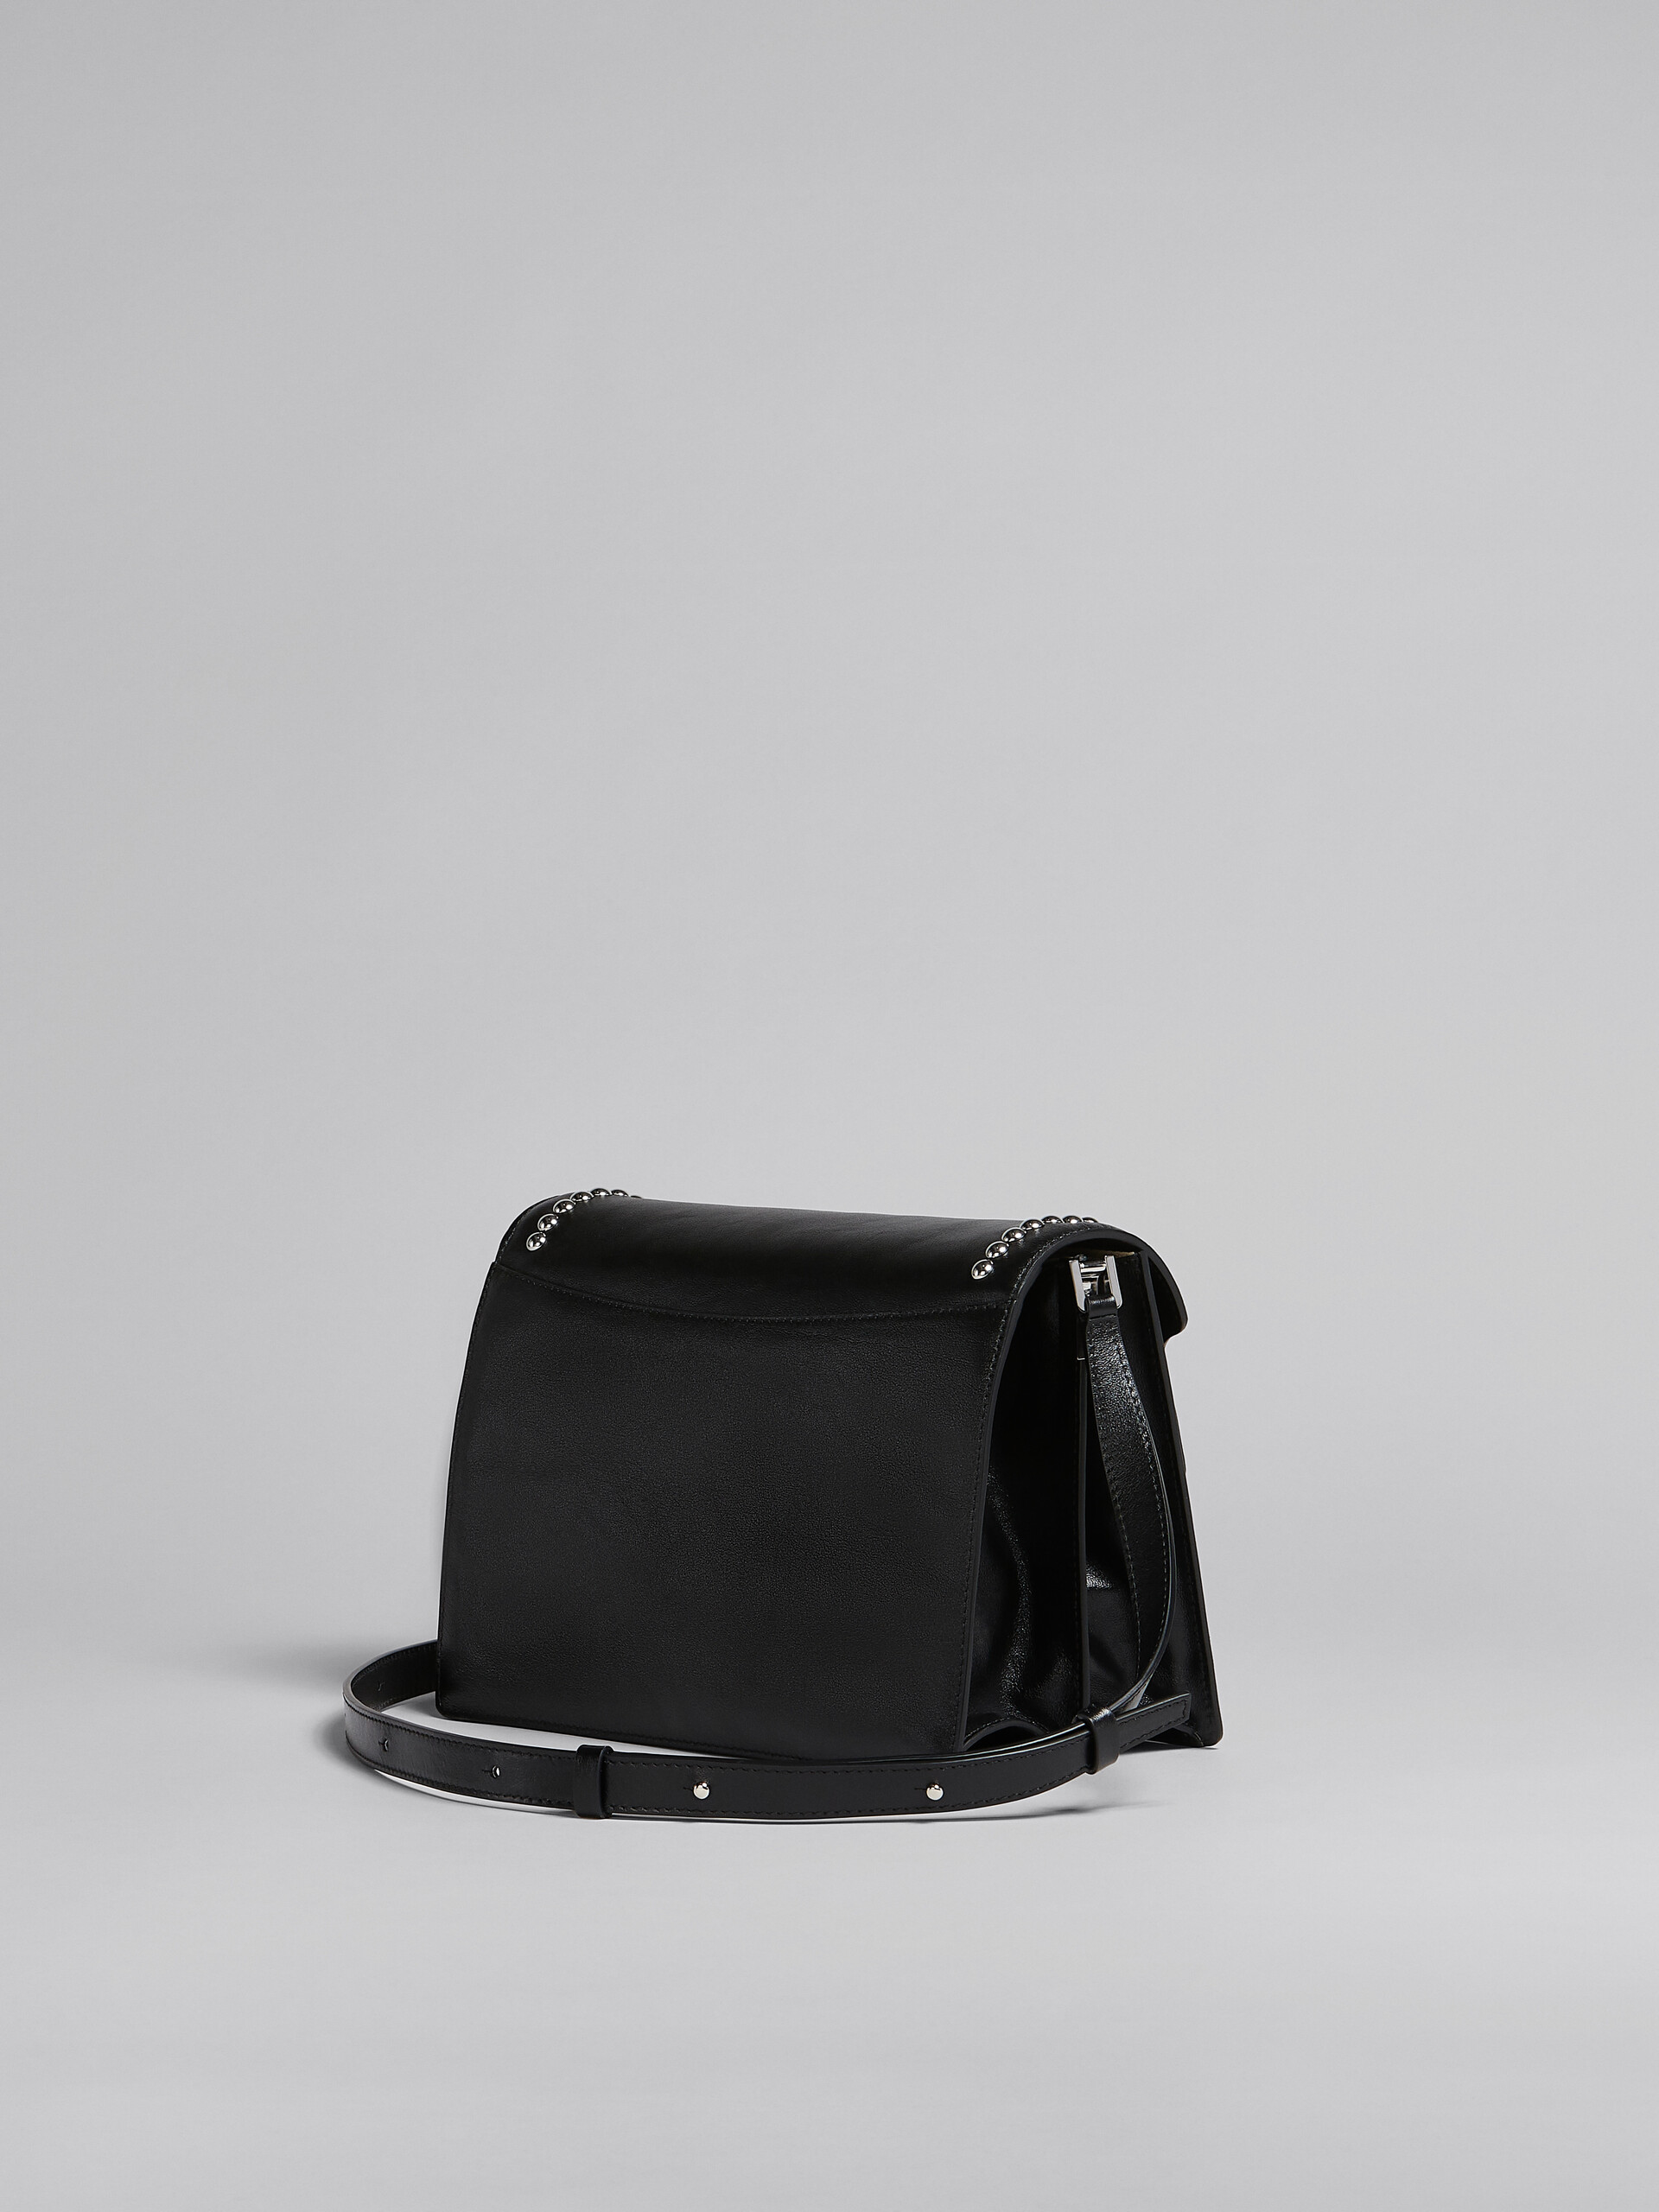 Trunk Soft Large Bag in black leather with studs - Shoulder Bags - Image 3